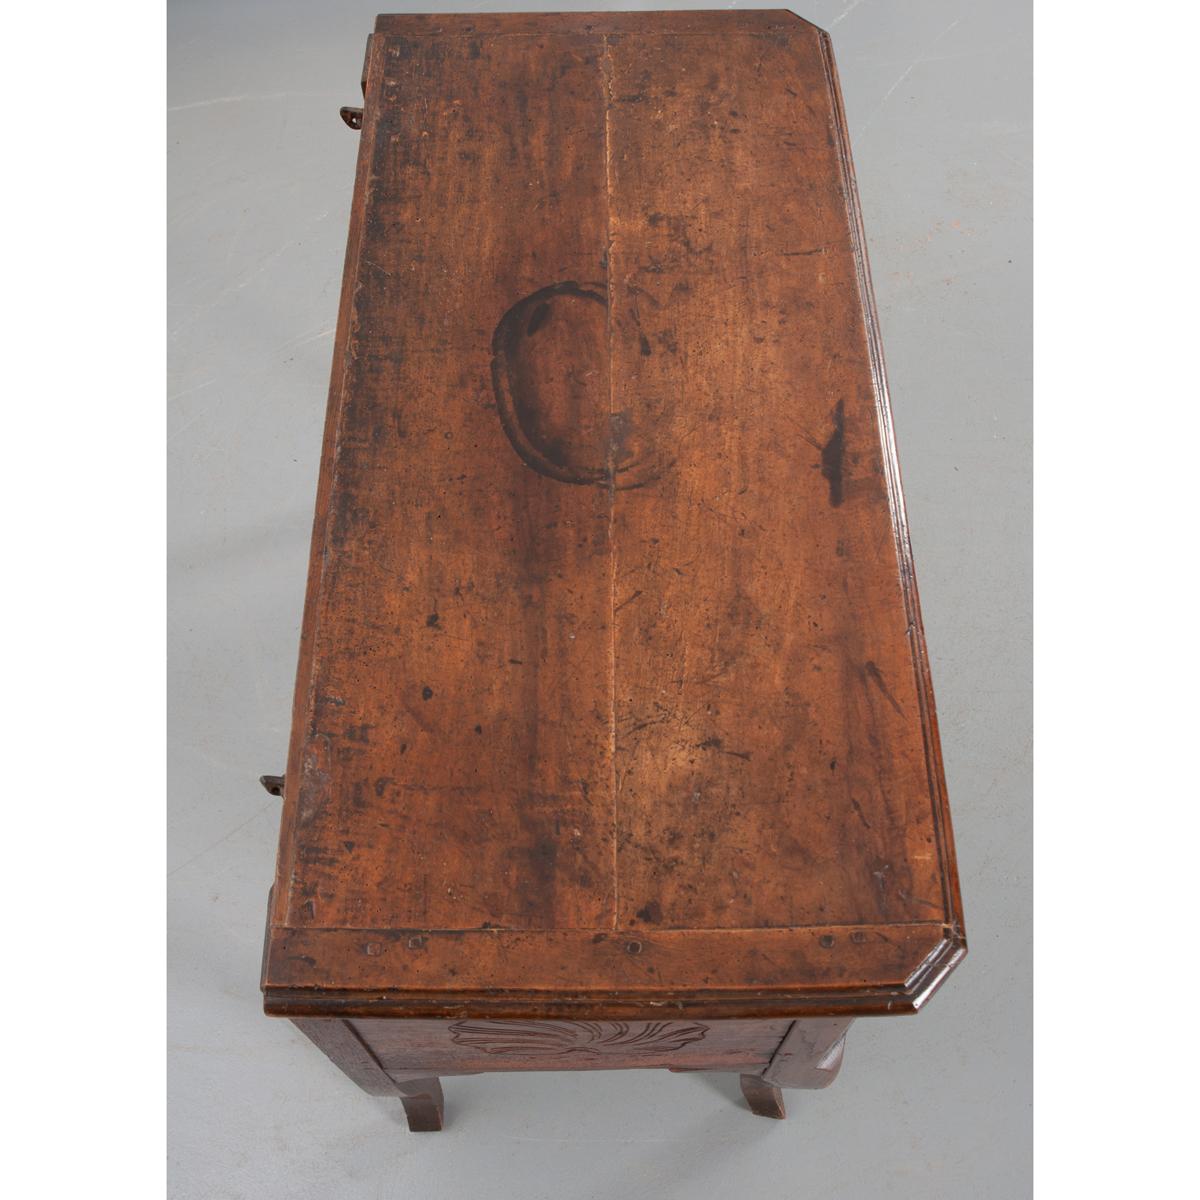 A small walnut petrin or dough bin with a deep, rich patina. This wonderful antique is hand-pegged with treenails. The top is a lid that when lifted opens a single storage compartment for proofing bread. A wonderfully carved shell and wheat motif